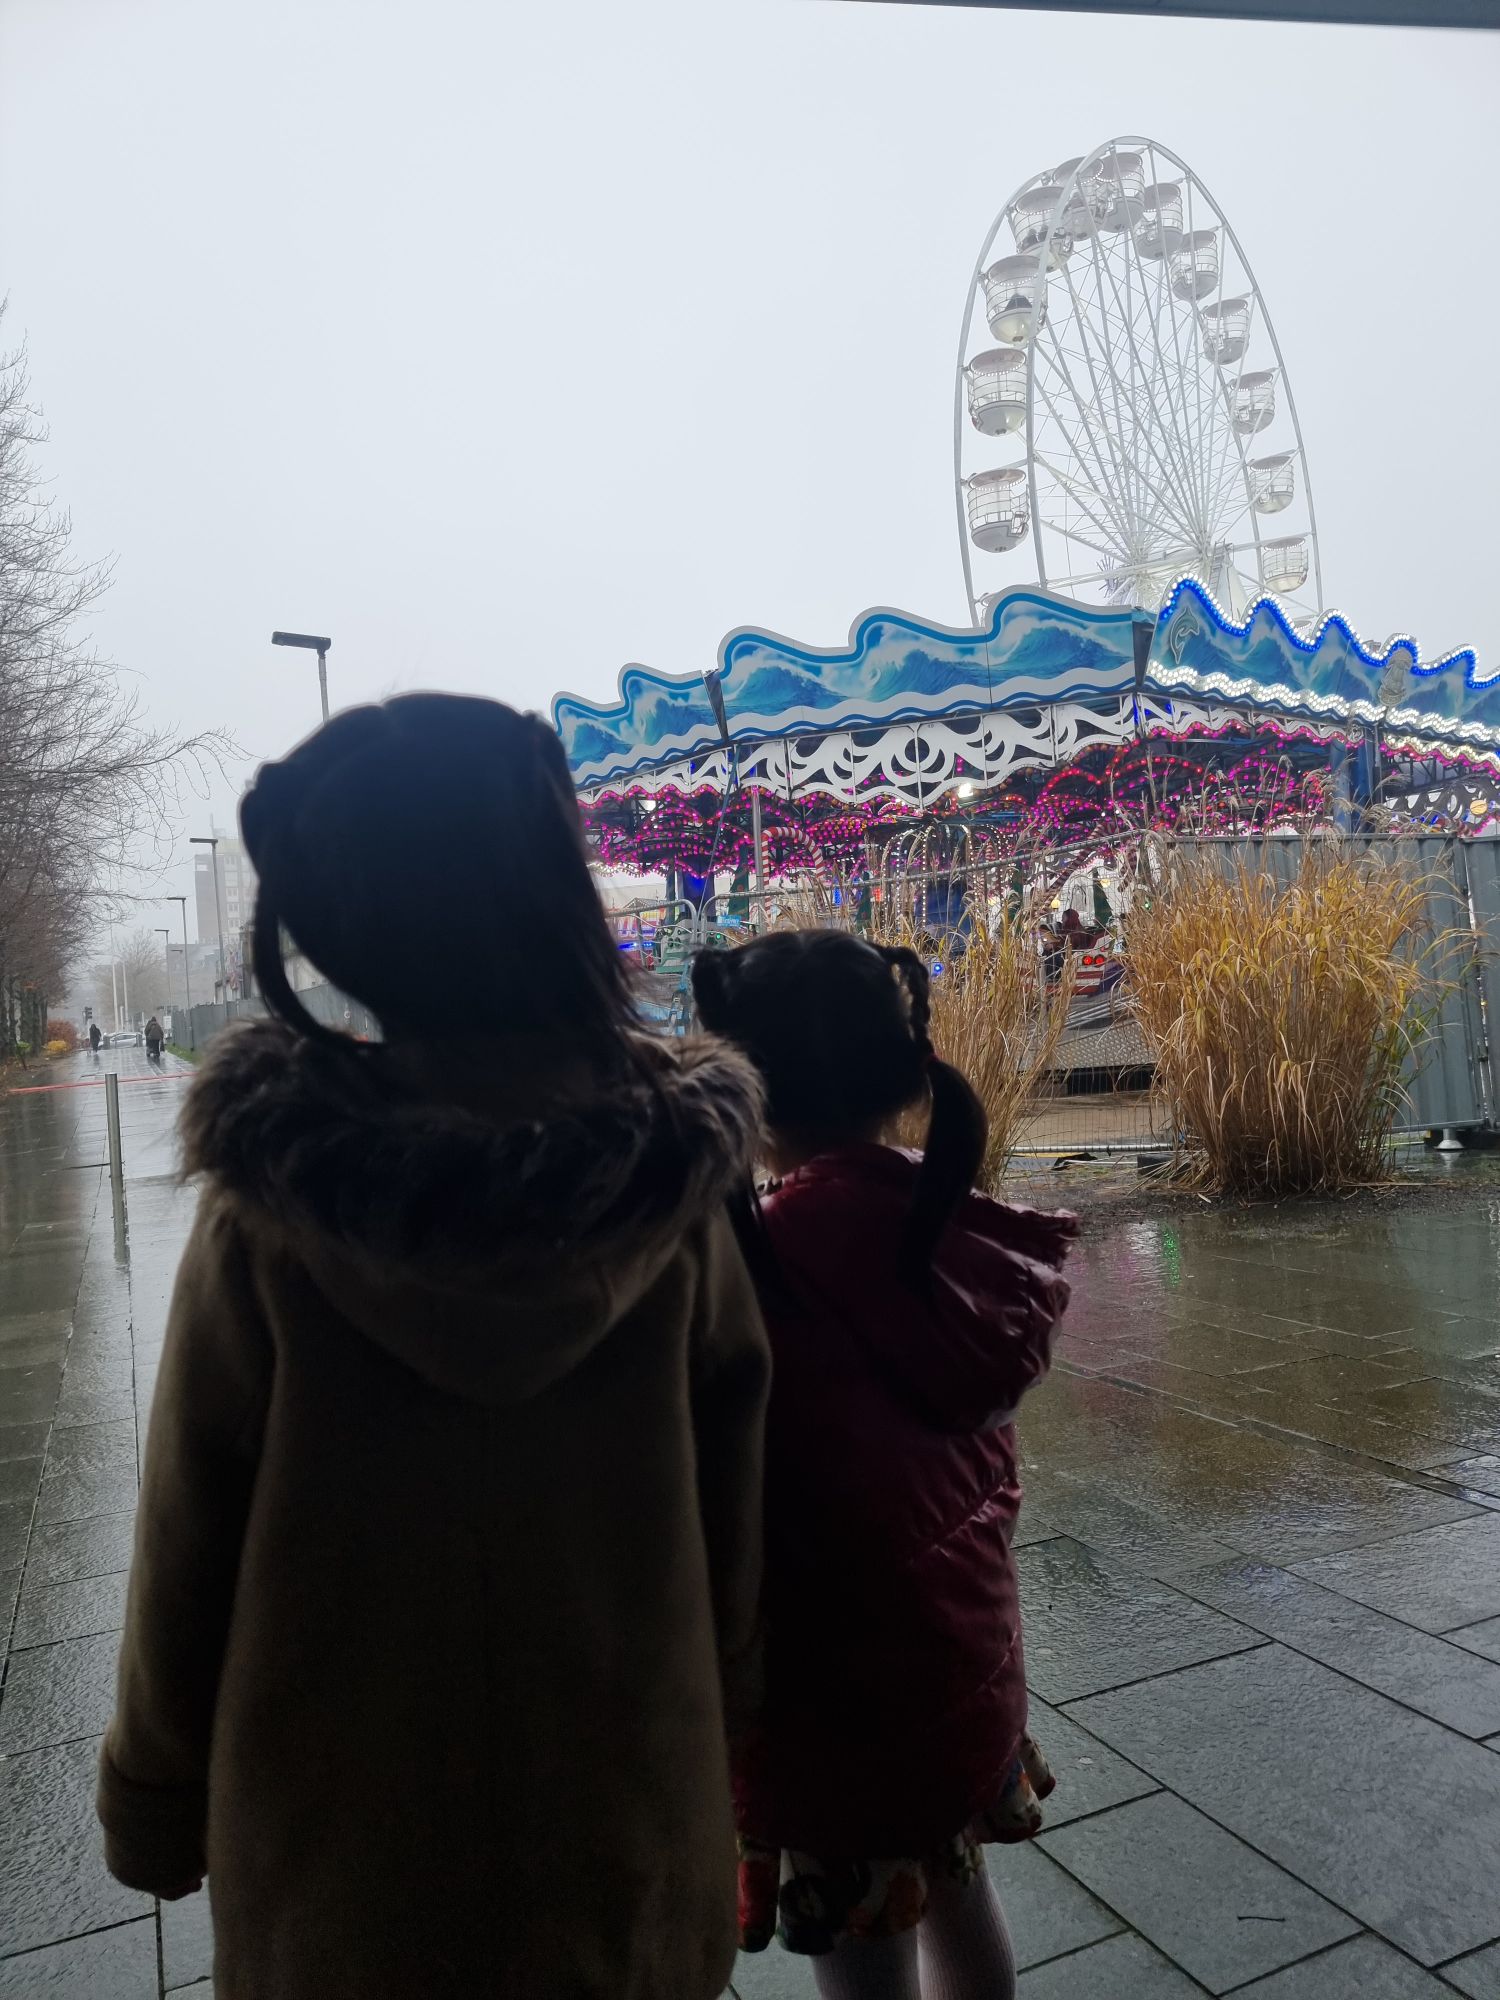 Two little girls look at the rides with excitement